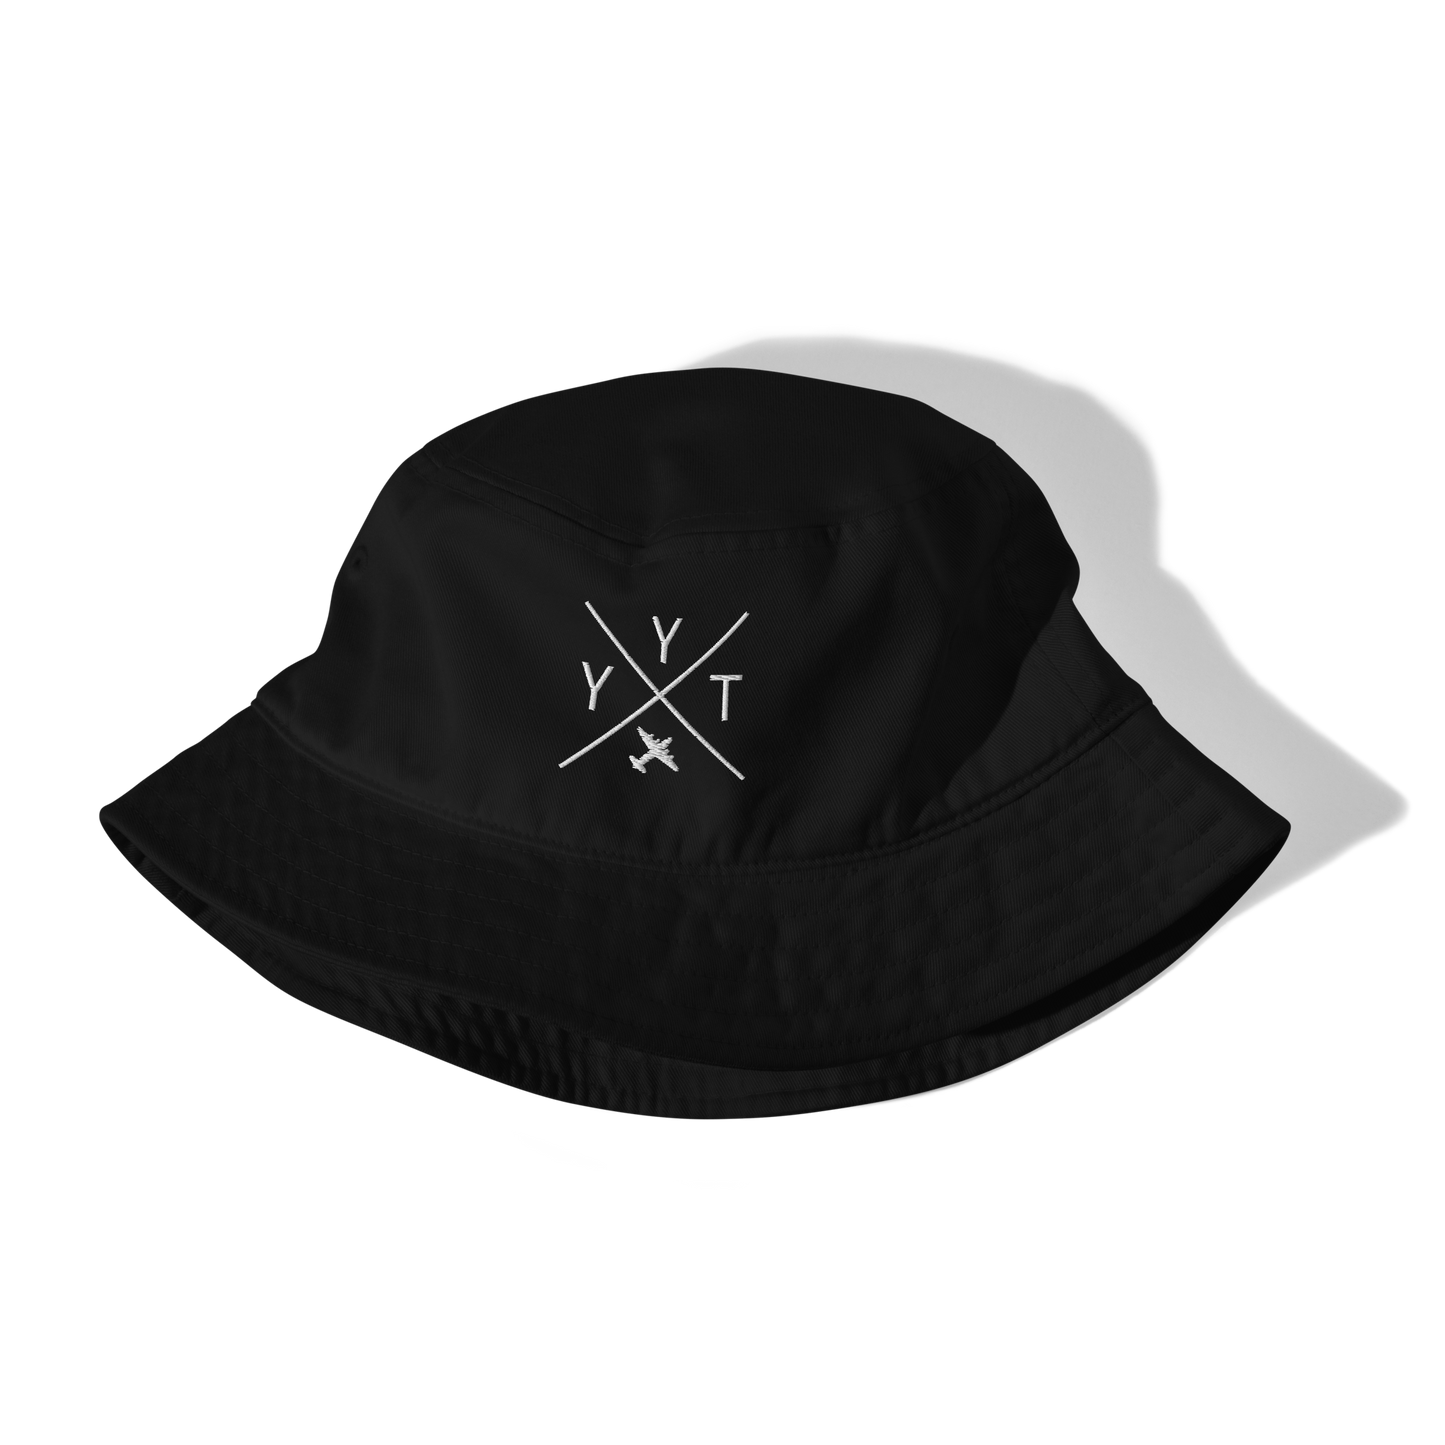 YHM Designs - YYT St. John's Organic Cotton Bucket Hat - Crossed-X Design with Airport Code and Vintage Propliner - White Embroidery - Image 02